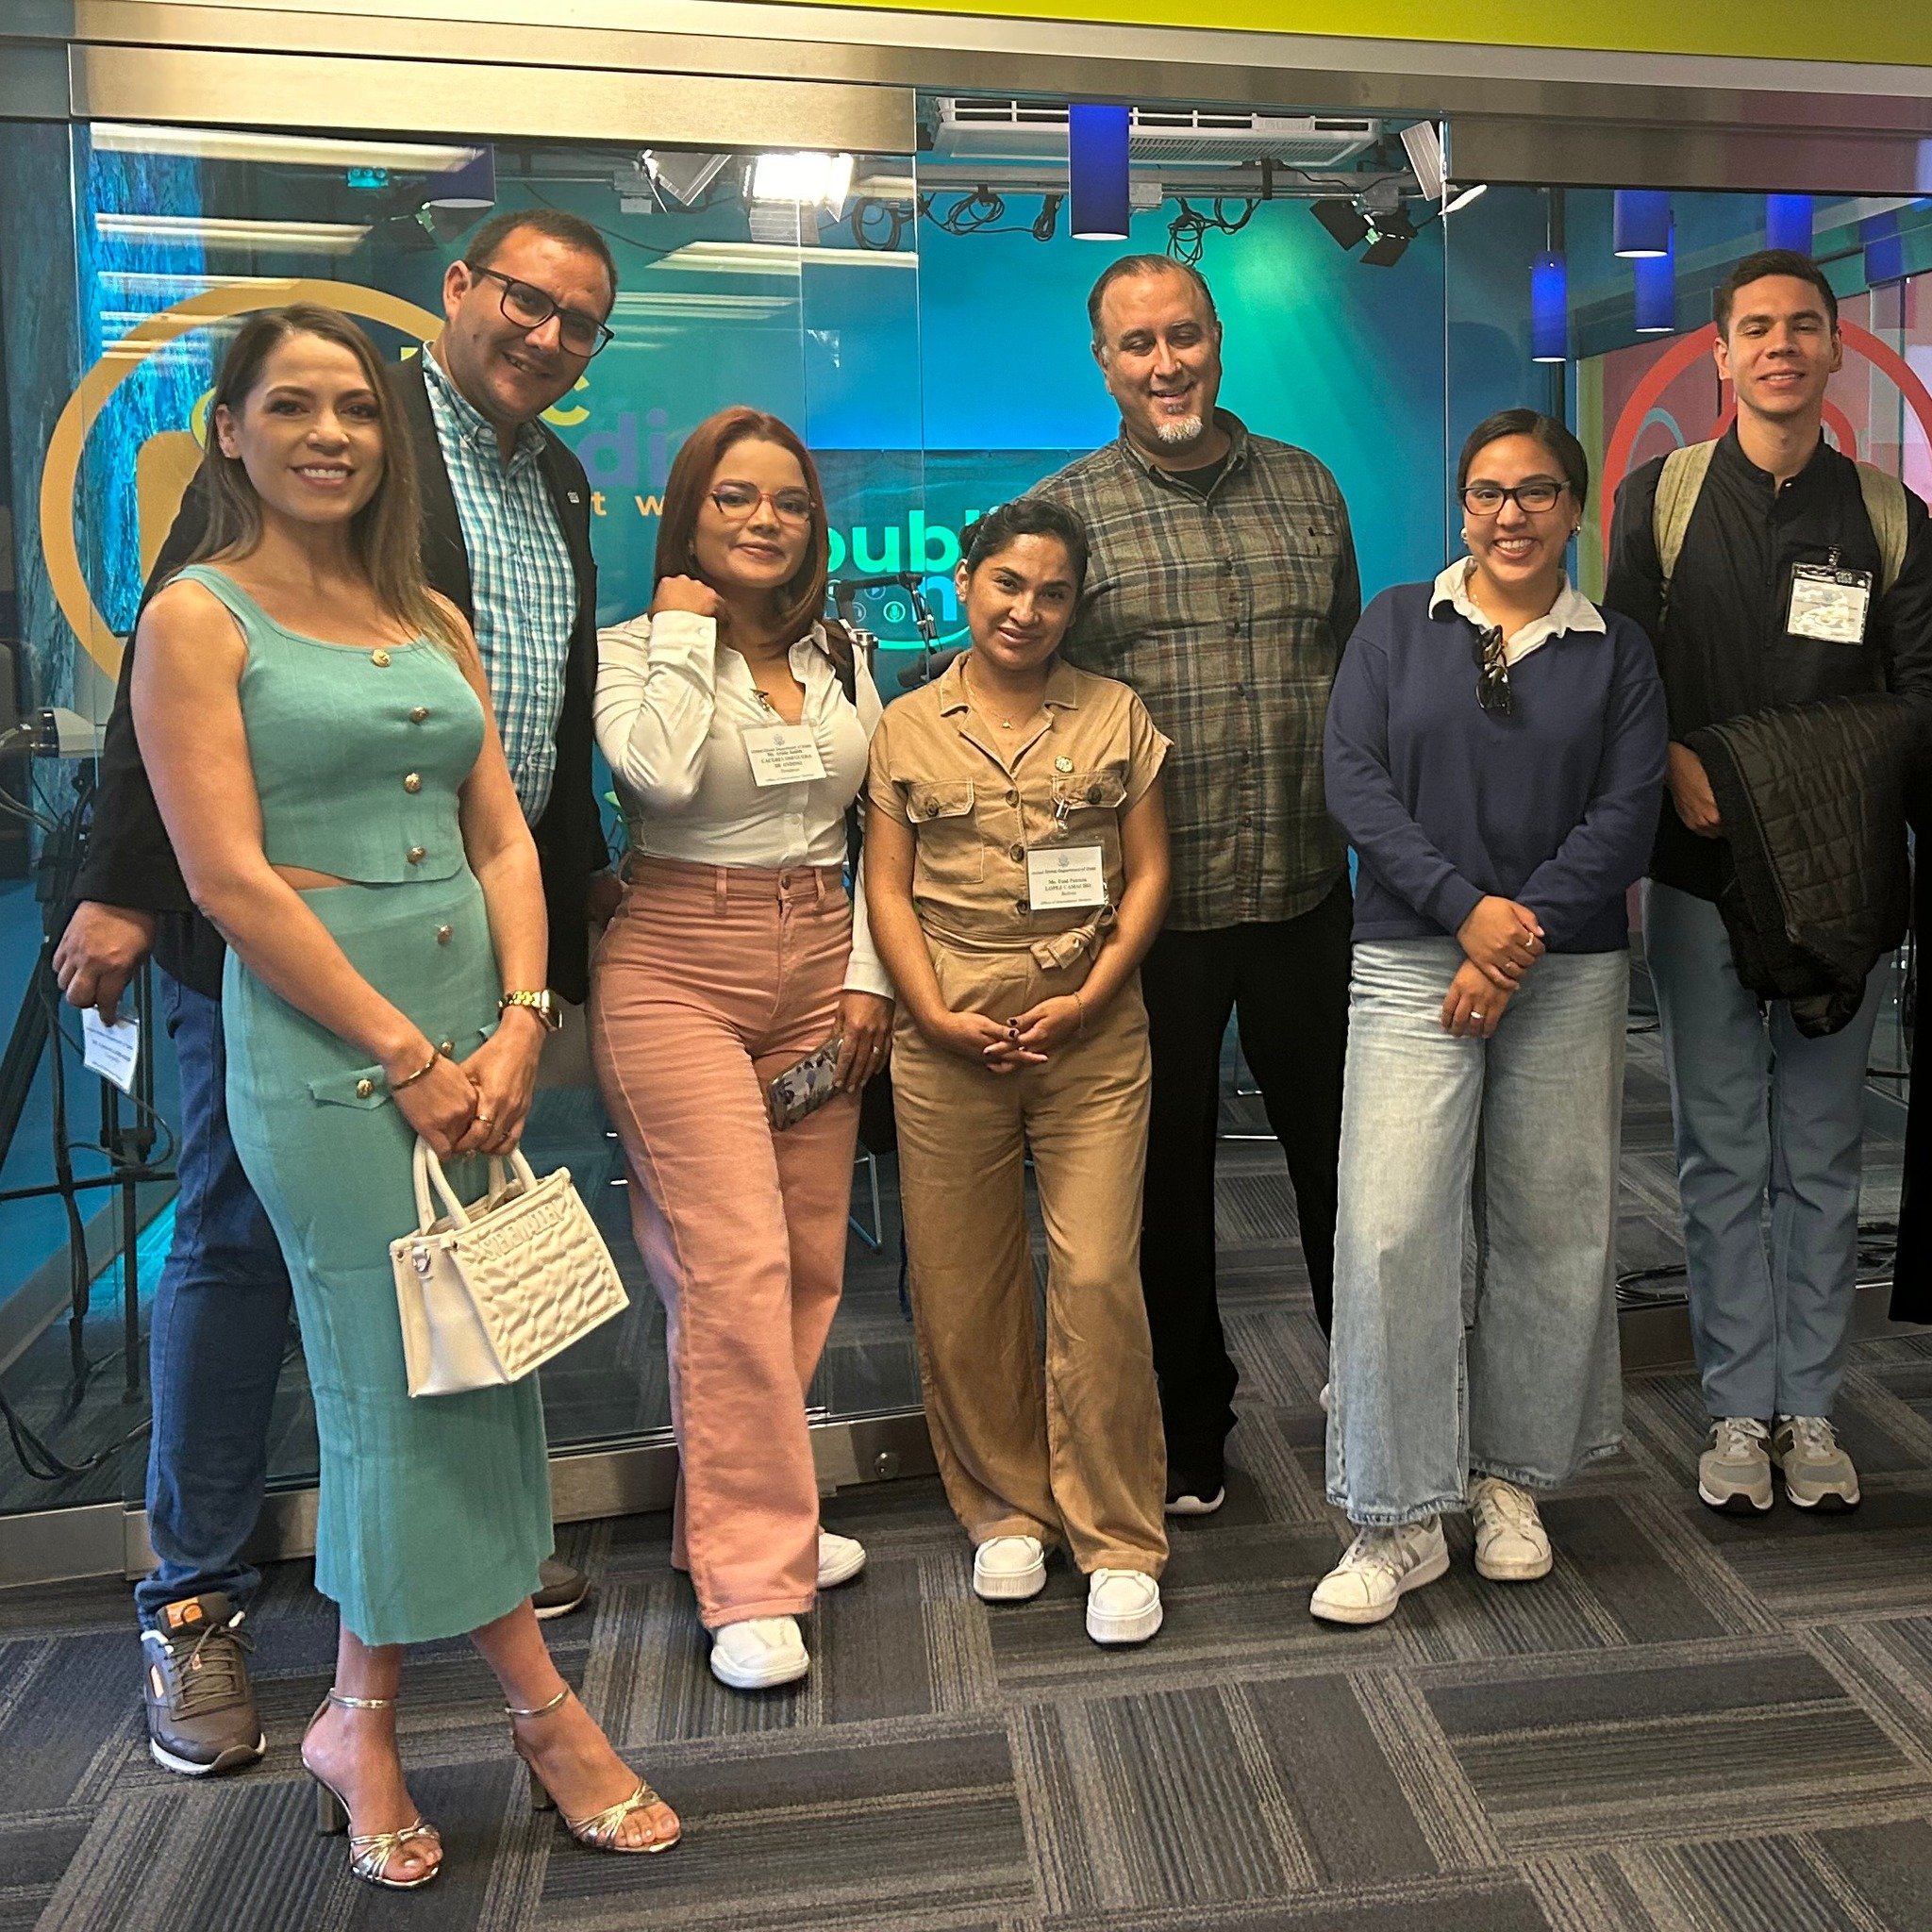 It's been an honor connecting IVLP participants from this Edward R. Murrow Program for Journalists -  New and Traditional Broadcast Media - from all over the Americas - with their peers in our community over the last week. 

Special thanks to Lem and